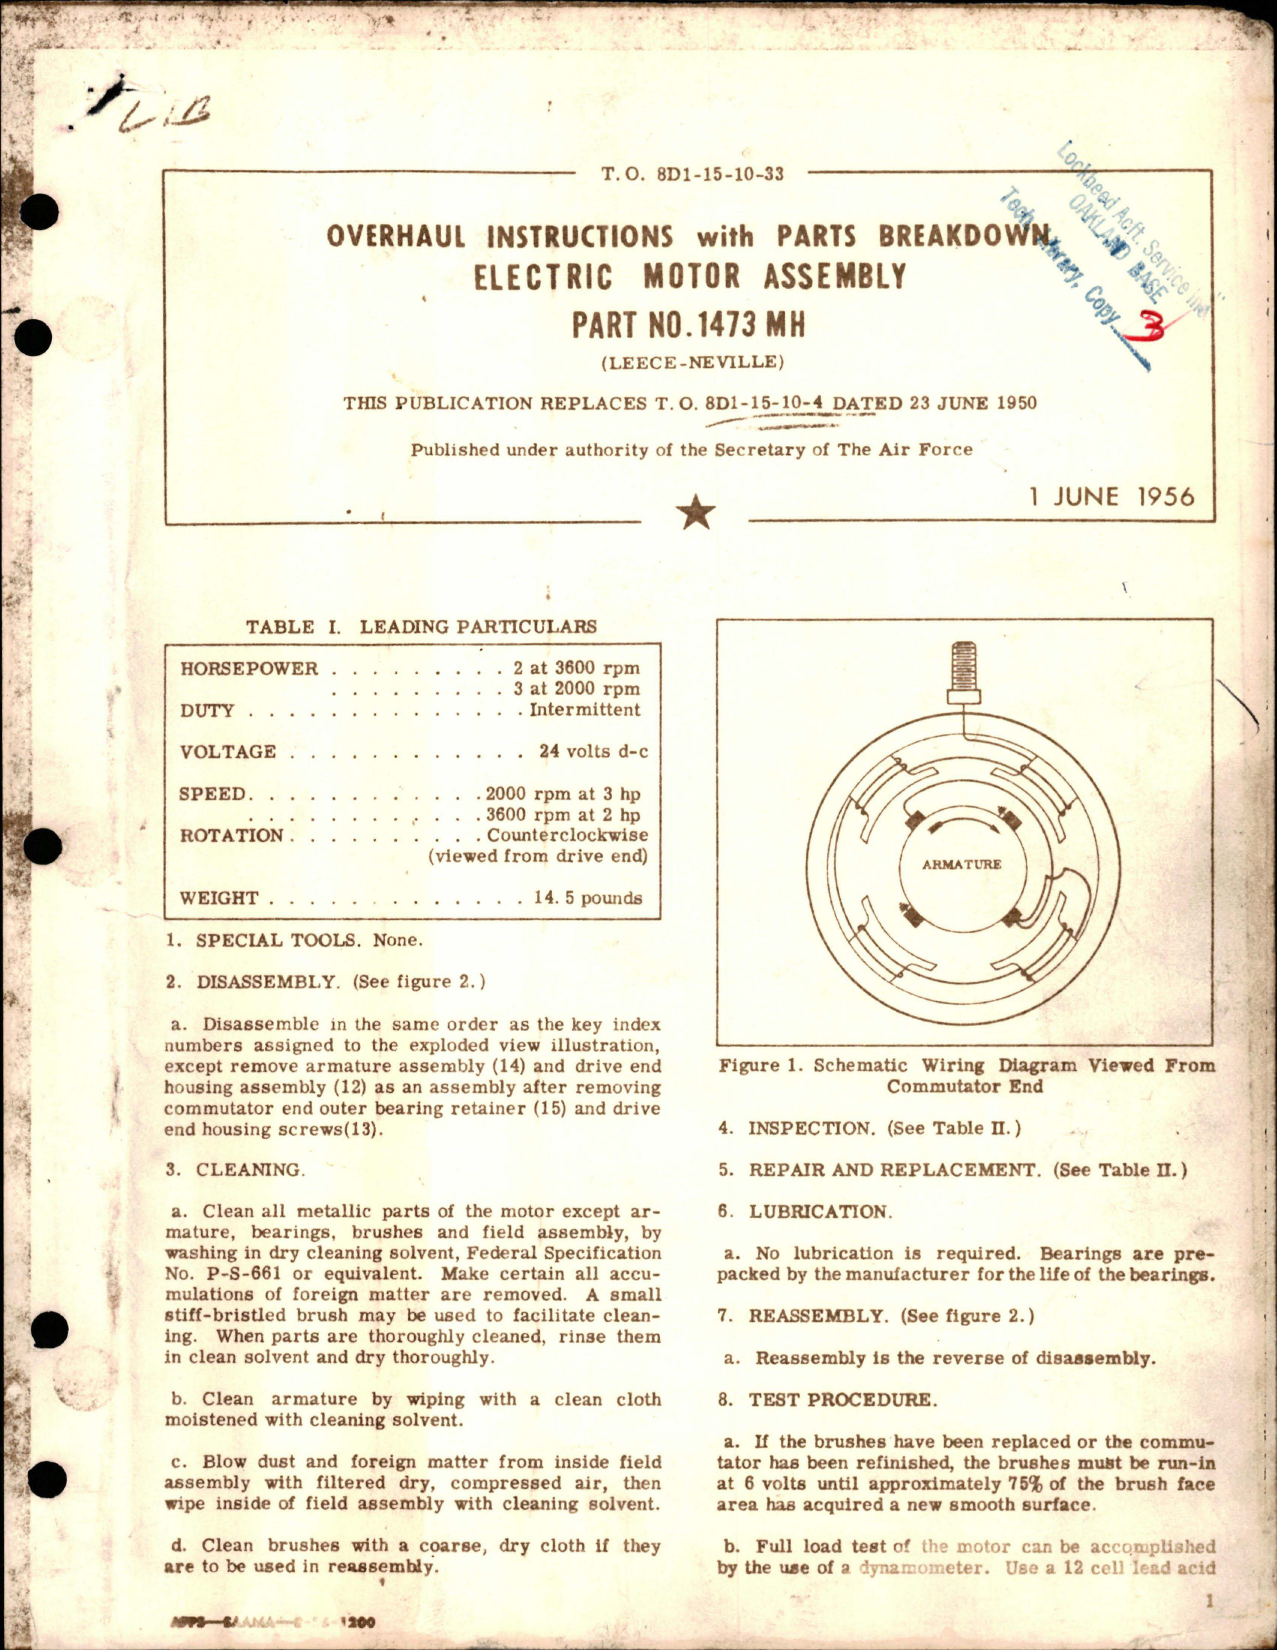 Sample page 1 from AirCorps Library document: Overhaul Instructions with Parts for Electric Motor Assembly - Part 1473 MH